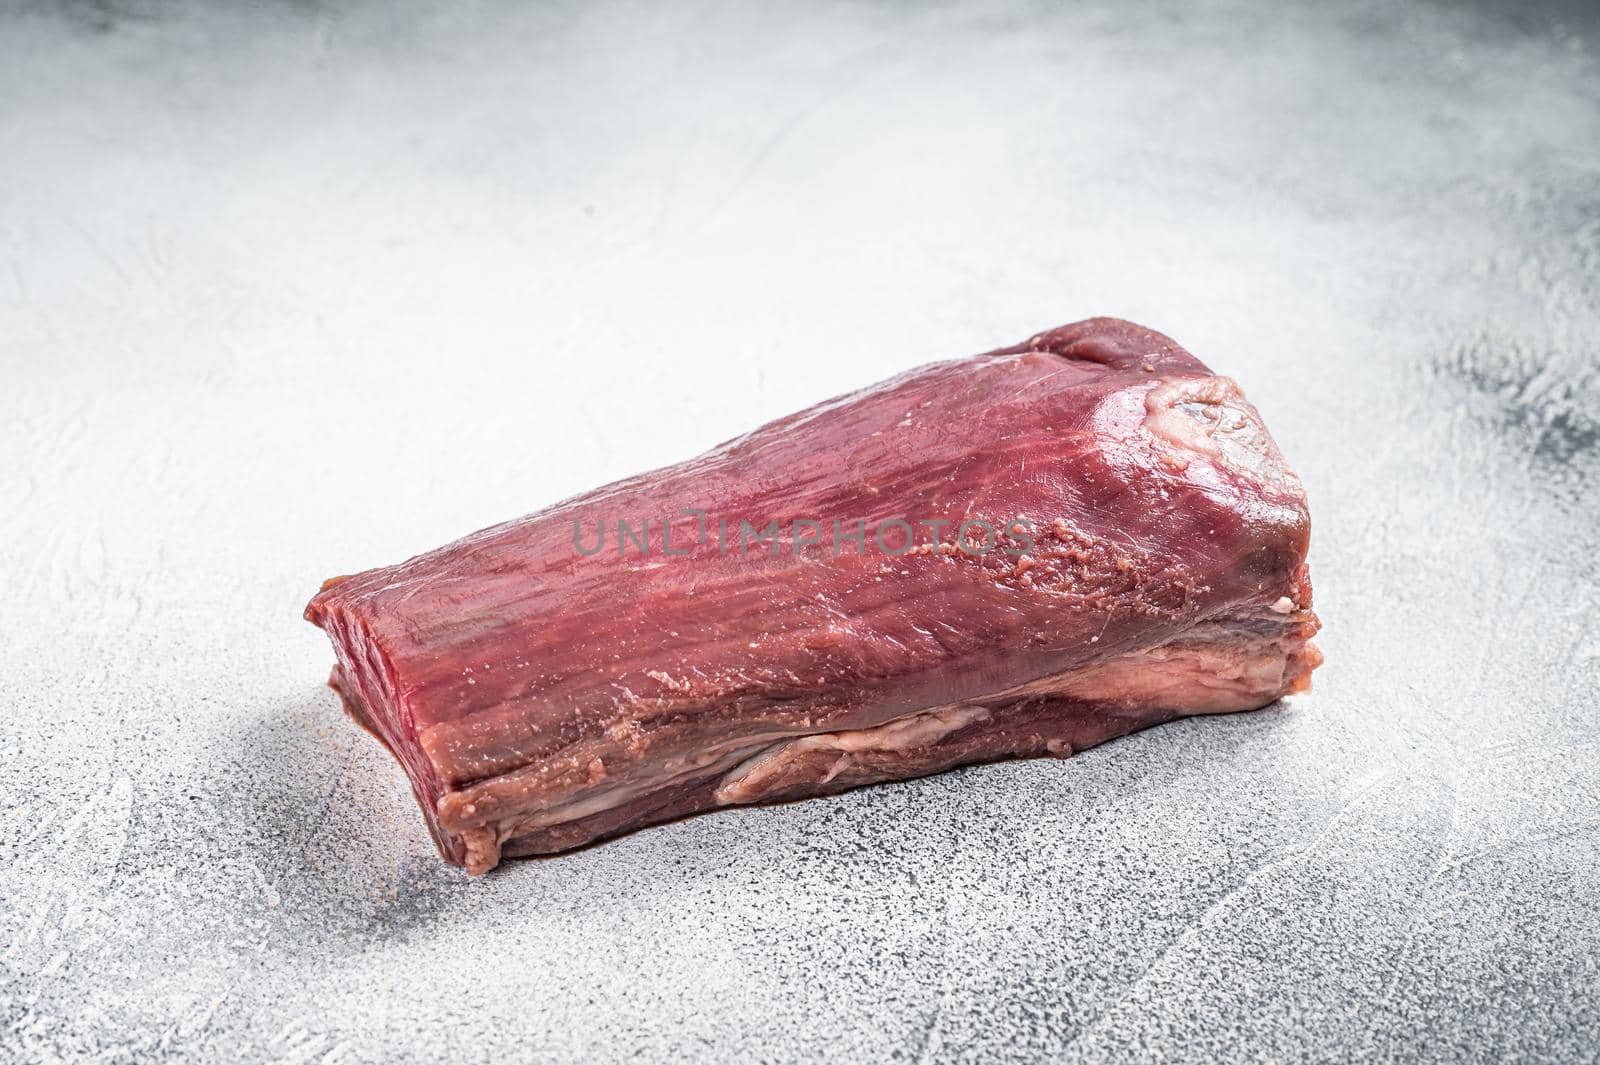 Beef Tenderloin raw meat on butcher table. White background. Top view.